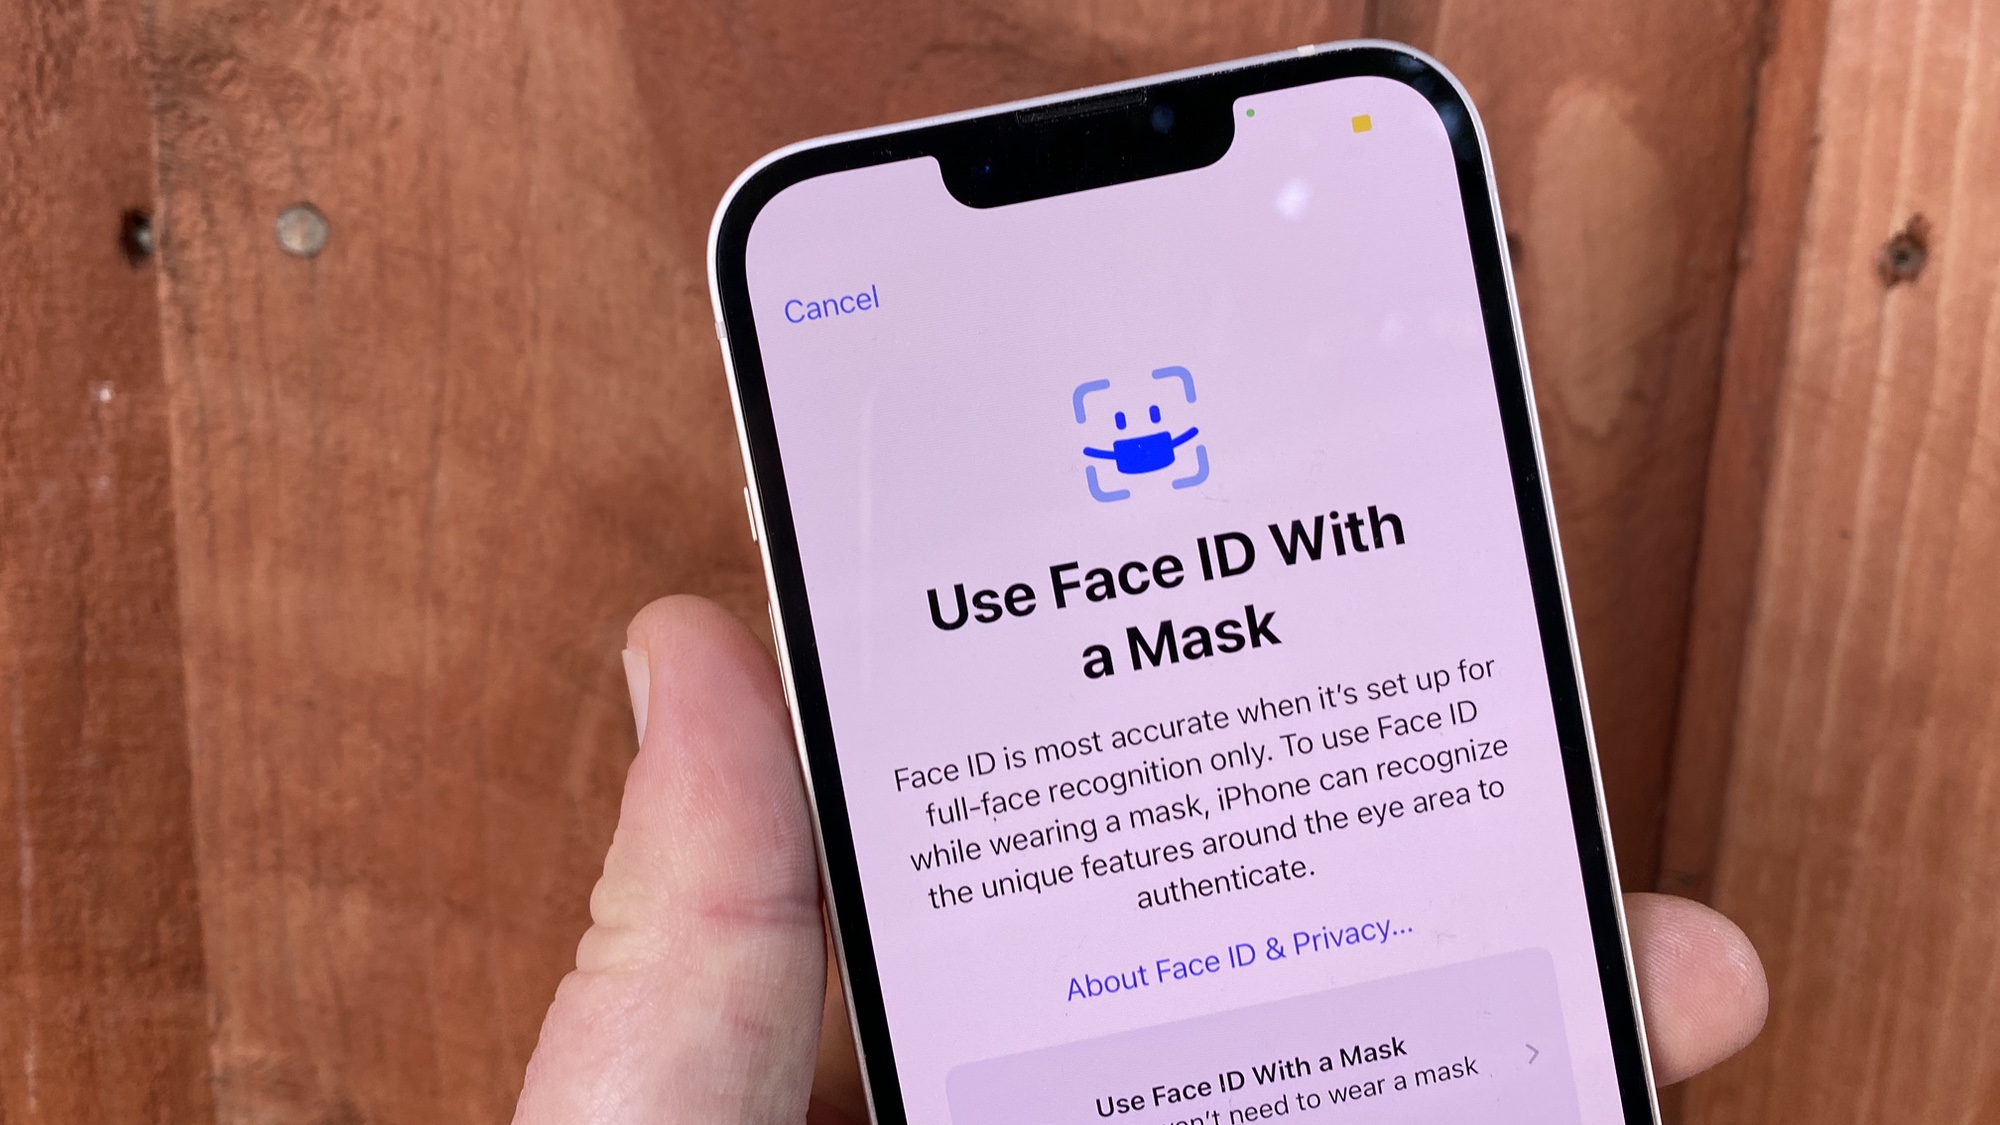 iOS 15.4 update adds face mask support to face id unlocking representing the iPhone's hidden features